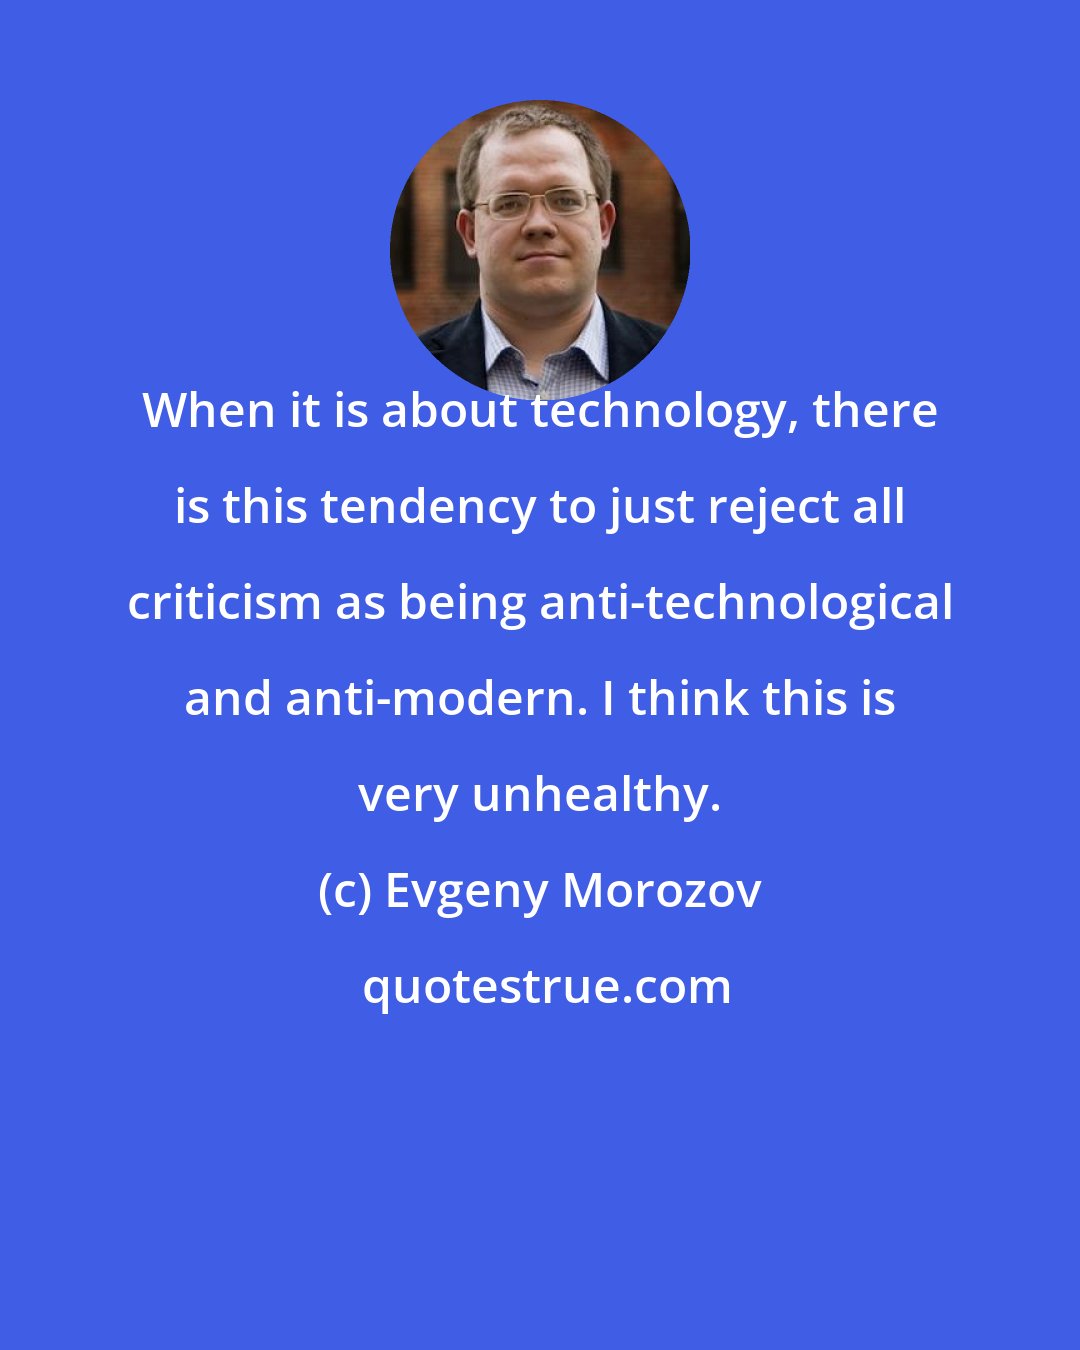 Evgeny Morozov: When it is about technology, there is this tendency to just reject all criticism as being anti-technological and anti-modern. I think this is very unhealthy.